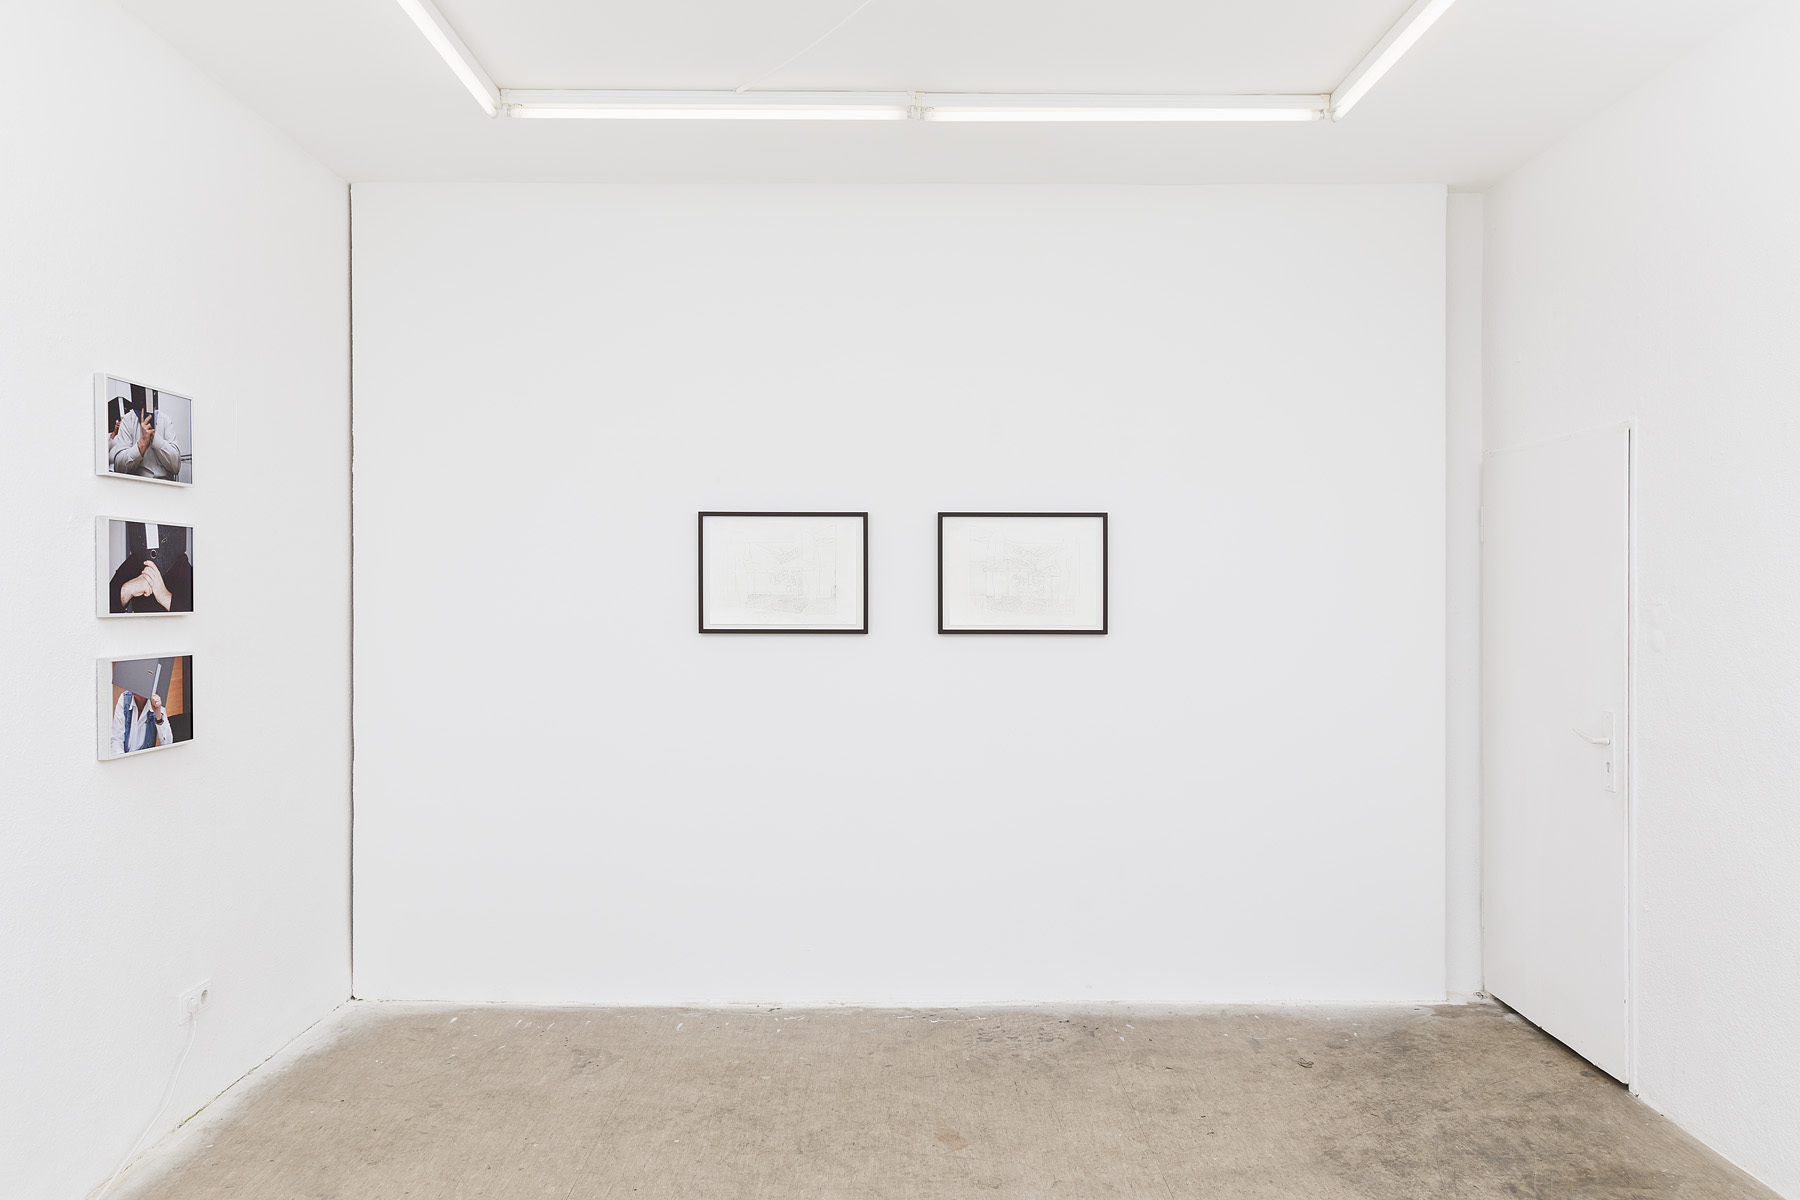 Installation view, from left to right: Anna Ruthenberg, Untitled, 2020-2021, series of photographs, 37x25cm. James Sturkey, Two Studies for Hardscaping at the Rear of the Nemesis Monster, 2021, pencil on paper, each 60x42cm.